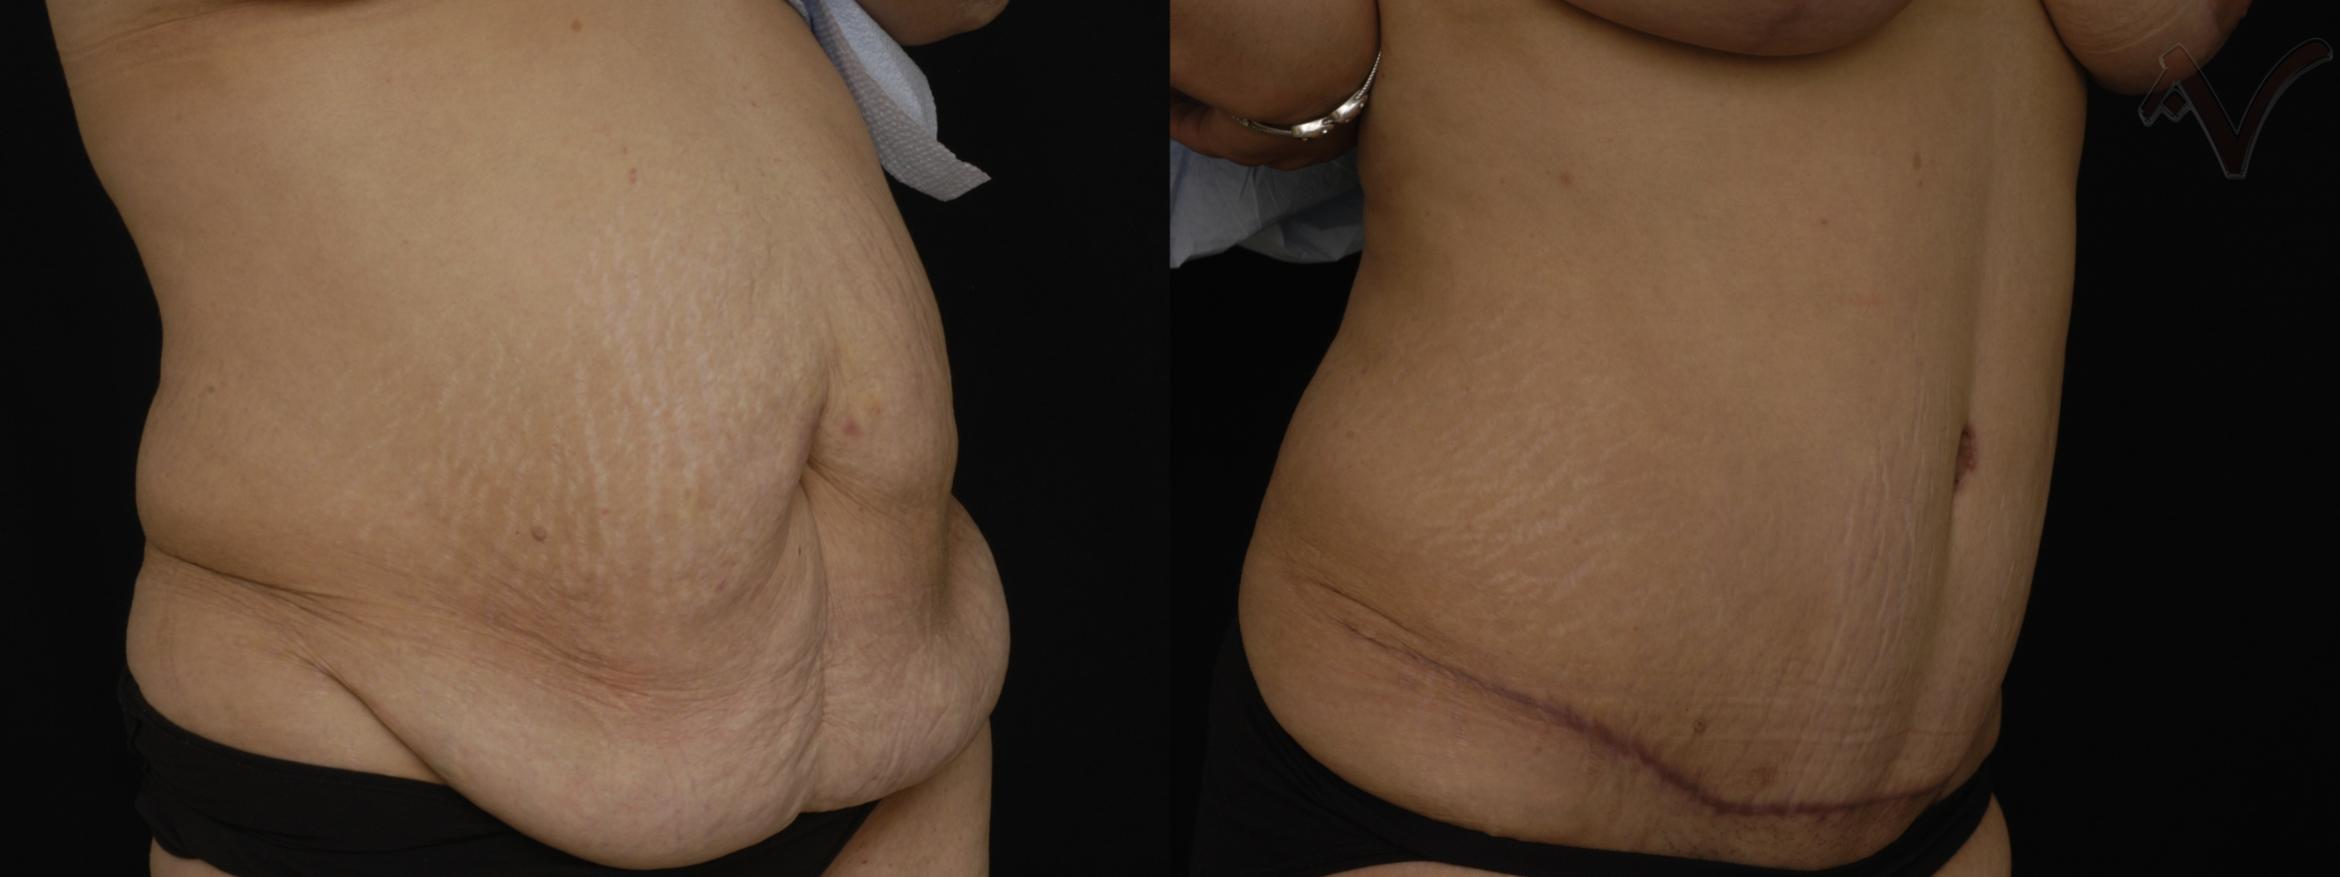 Before & After Abdominoplasty after Massive Weight Loss Case 201 Right Oblique View in Burbank, CA